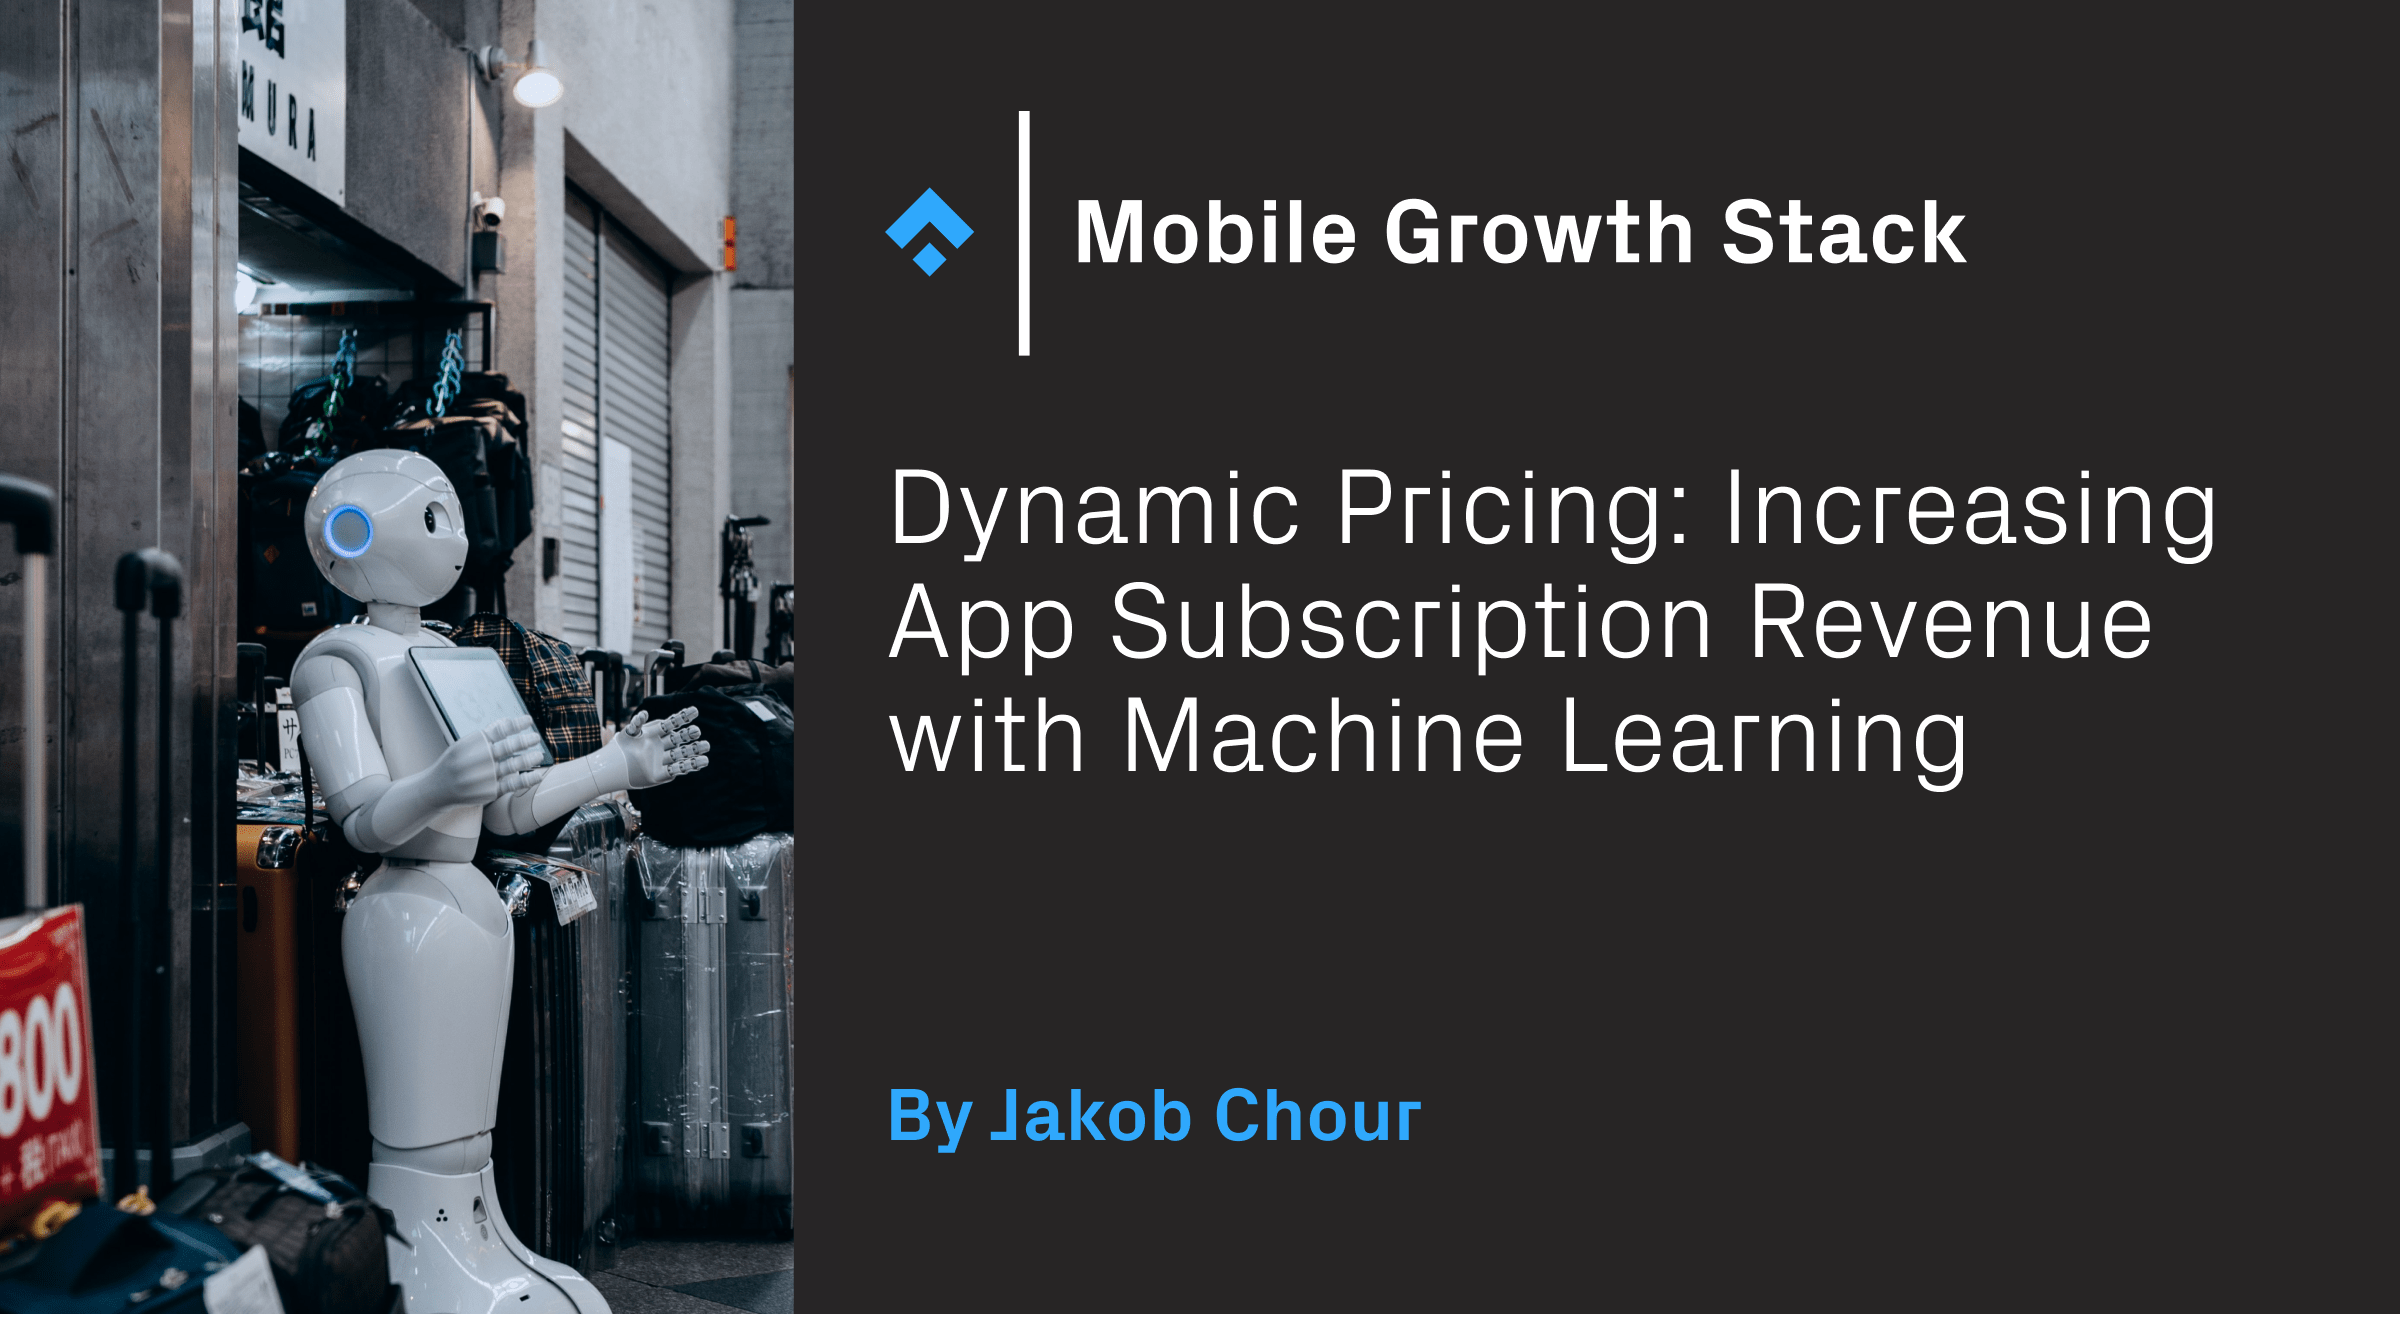 Dynamic Pricing: Increasing App Subscription Revenue with Machine Learning